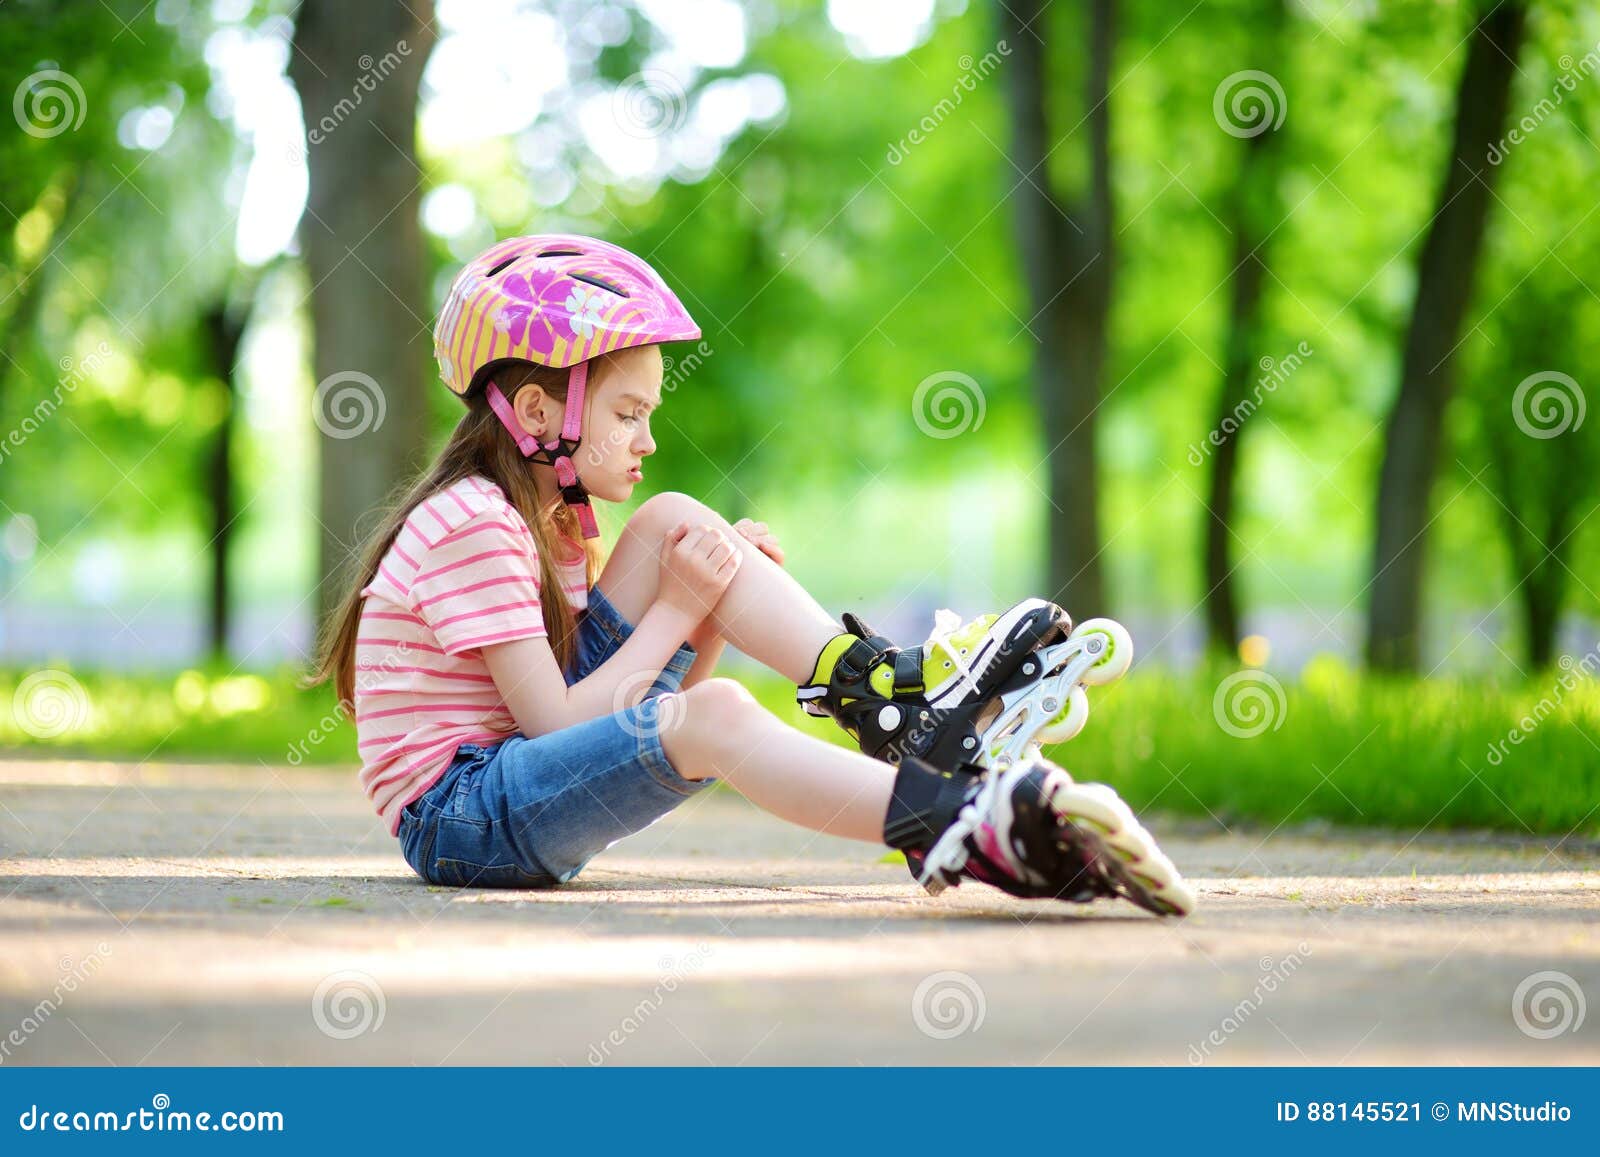 pretty little girl learning to roller skate on beautiful summer day in a park